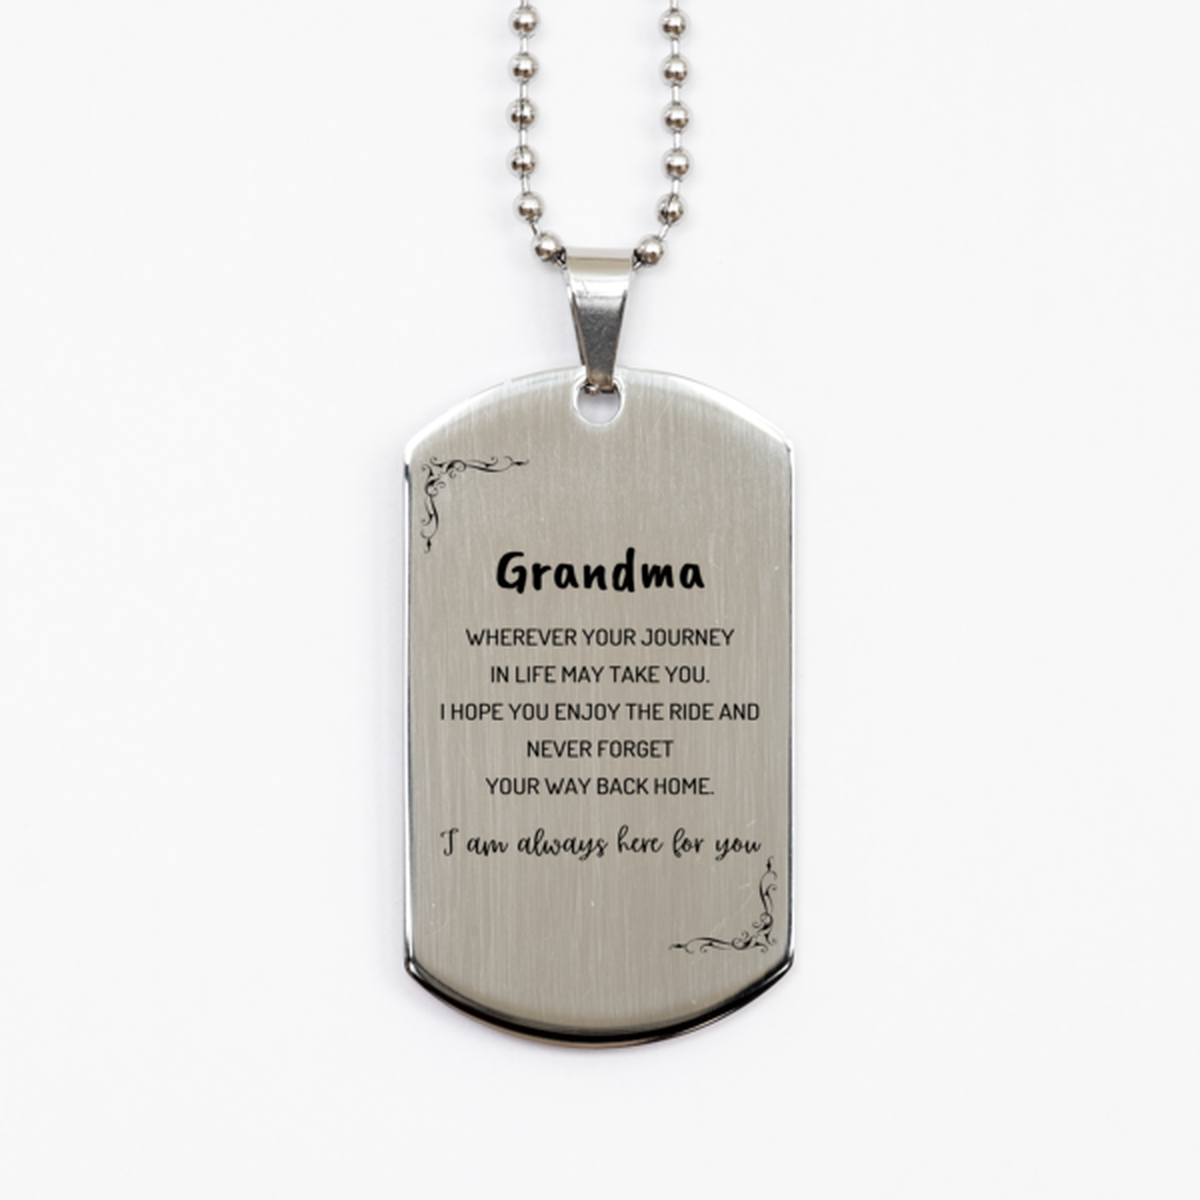 Grandma wherever your journey in life may take you, I am always here for you Grandma Silver Dog Tag, Awesome Christmas Gifts For Grandma, Grandma Birthday Gifts for Men Women Family Loved One